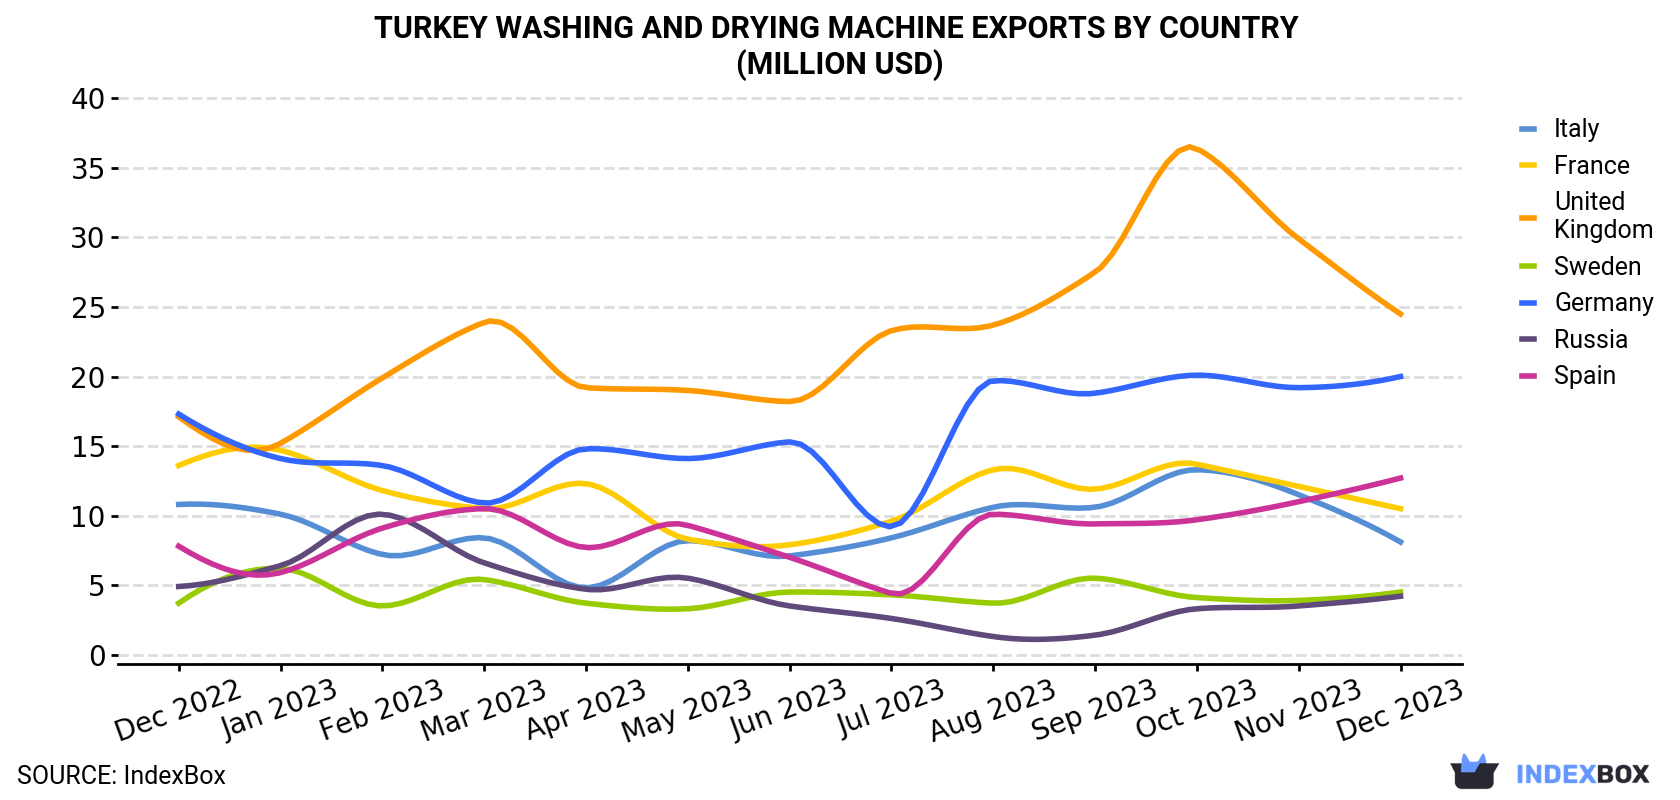 Turkey Washing and Drying Machine Exports By Country (Million USD)